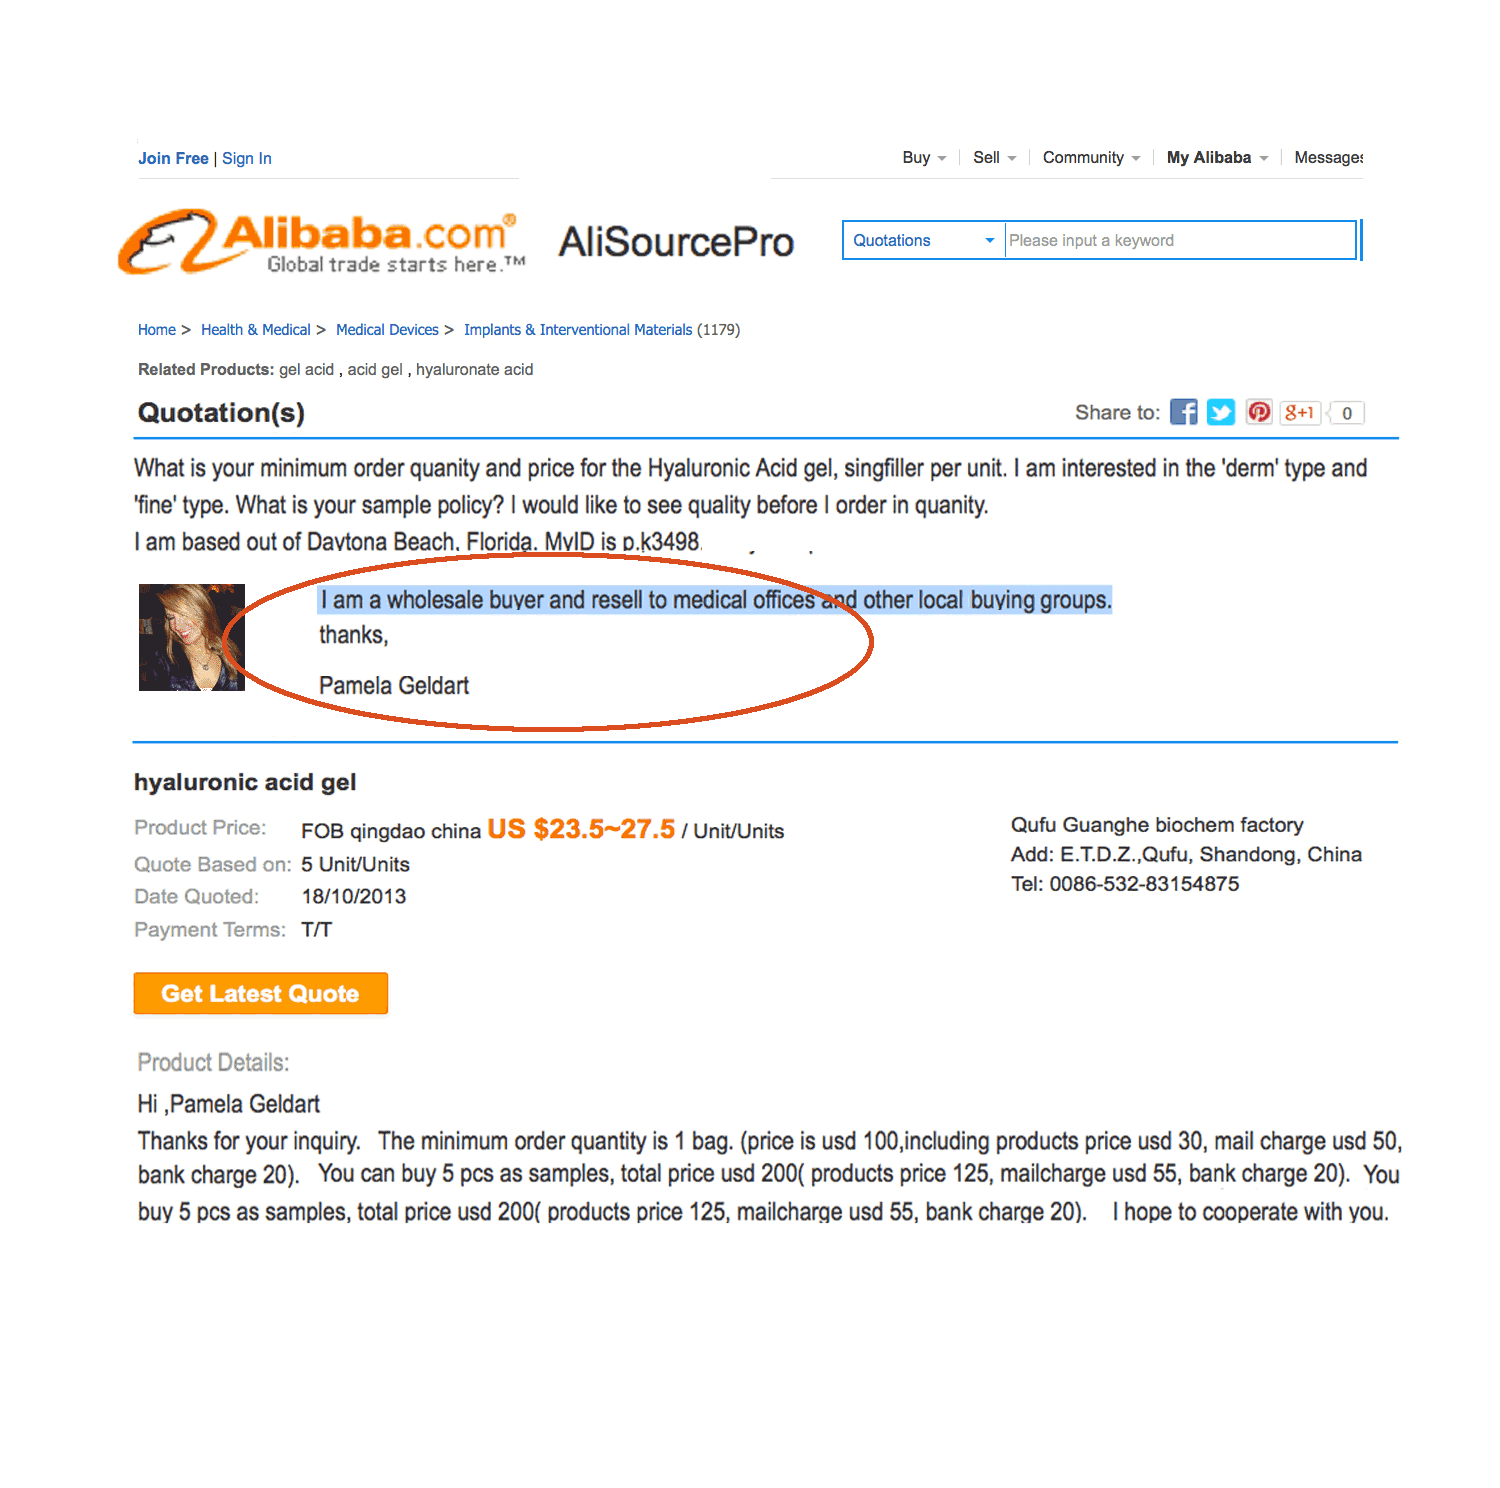 Publicly displayed (through Google search) of an Alibaba order by "Pam ela Kerstin Bergendal Geldart" as a "Medical Buyer and Wholesaler" (Listed online at Spokeo as "Smilegracey" with Roger Prieto, D